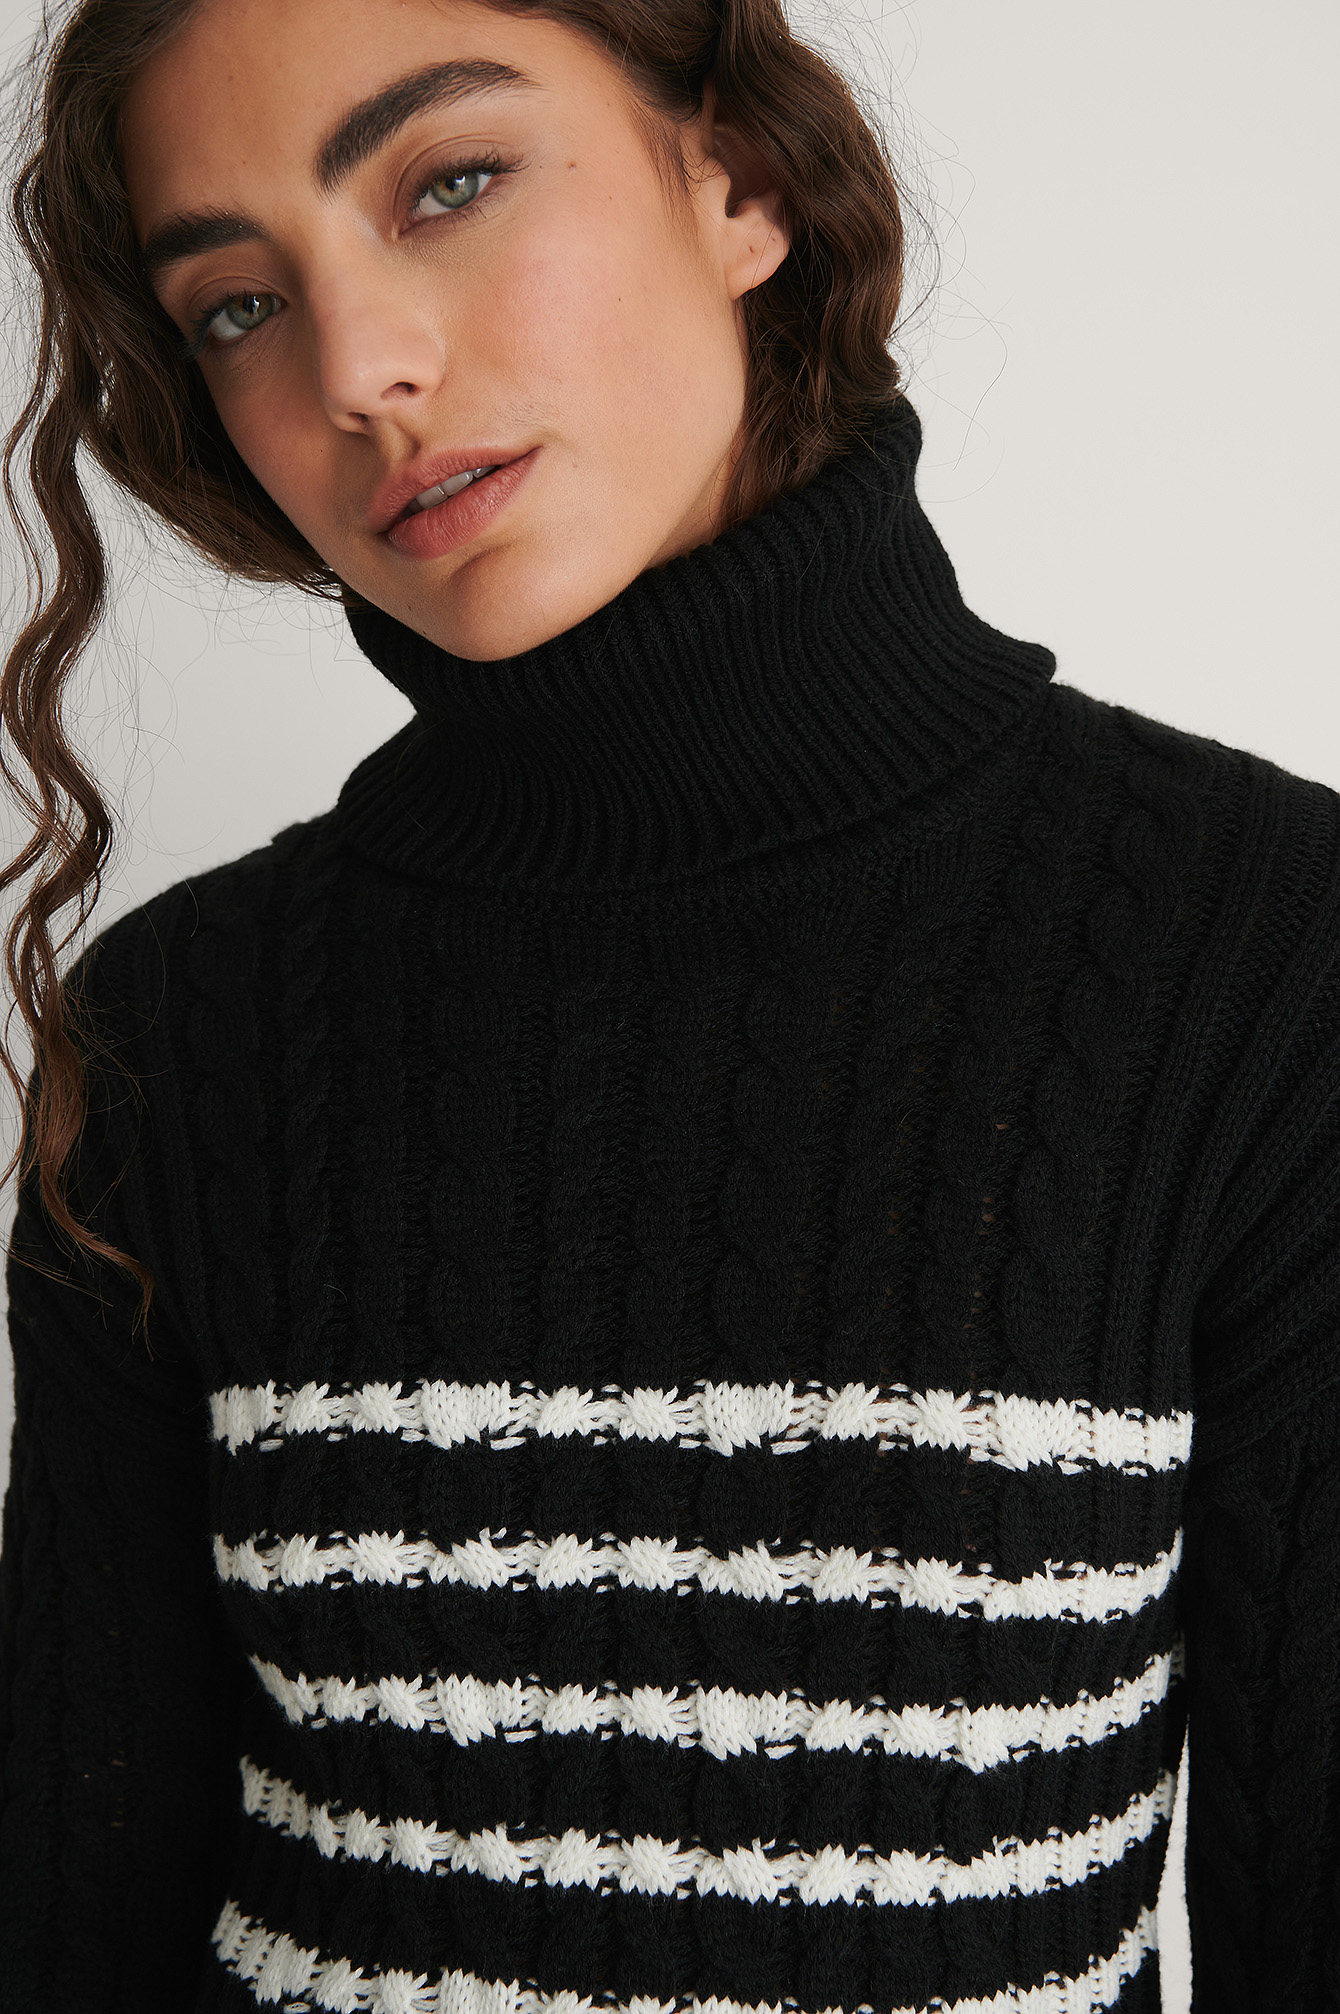 Black/White Cable Knitted Striped Sweater